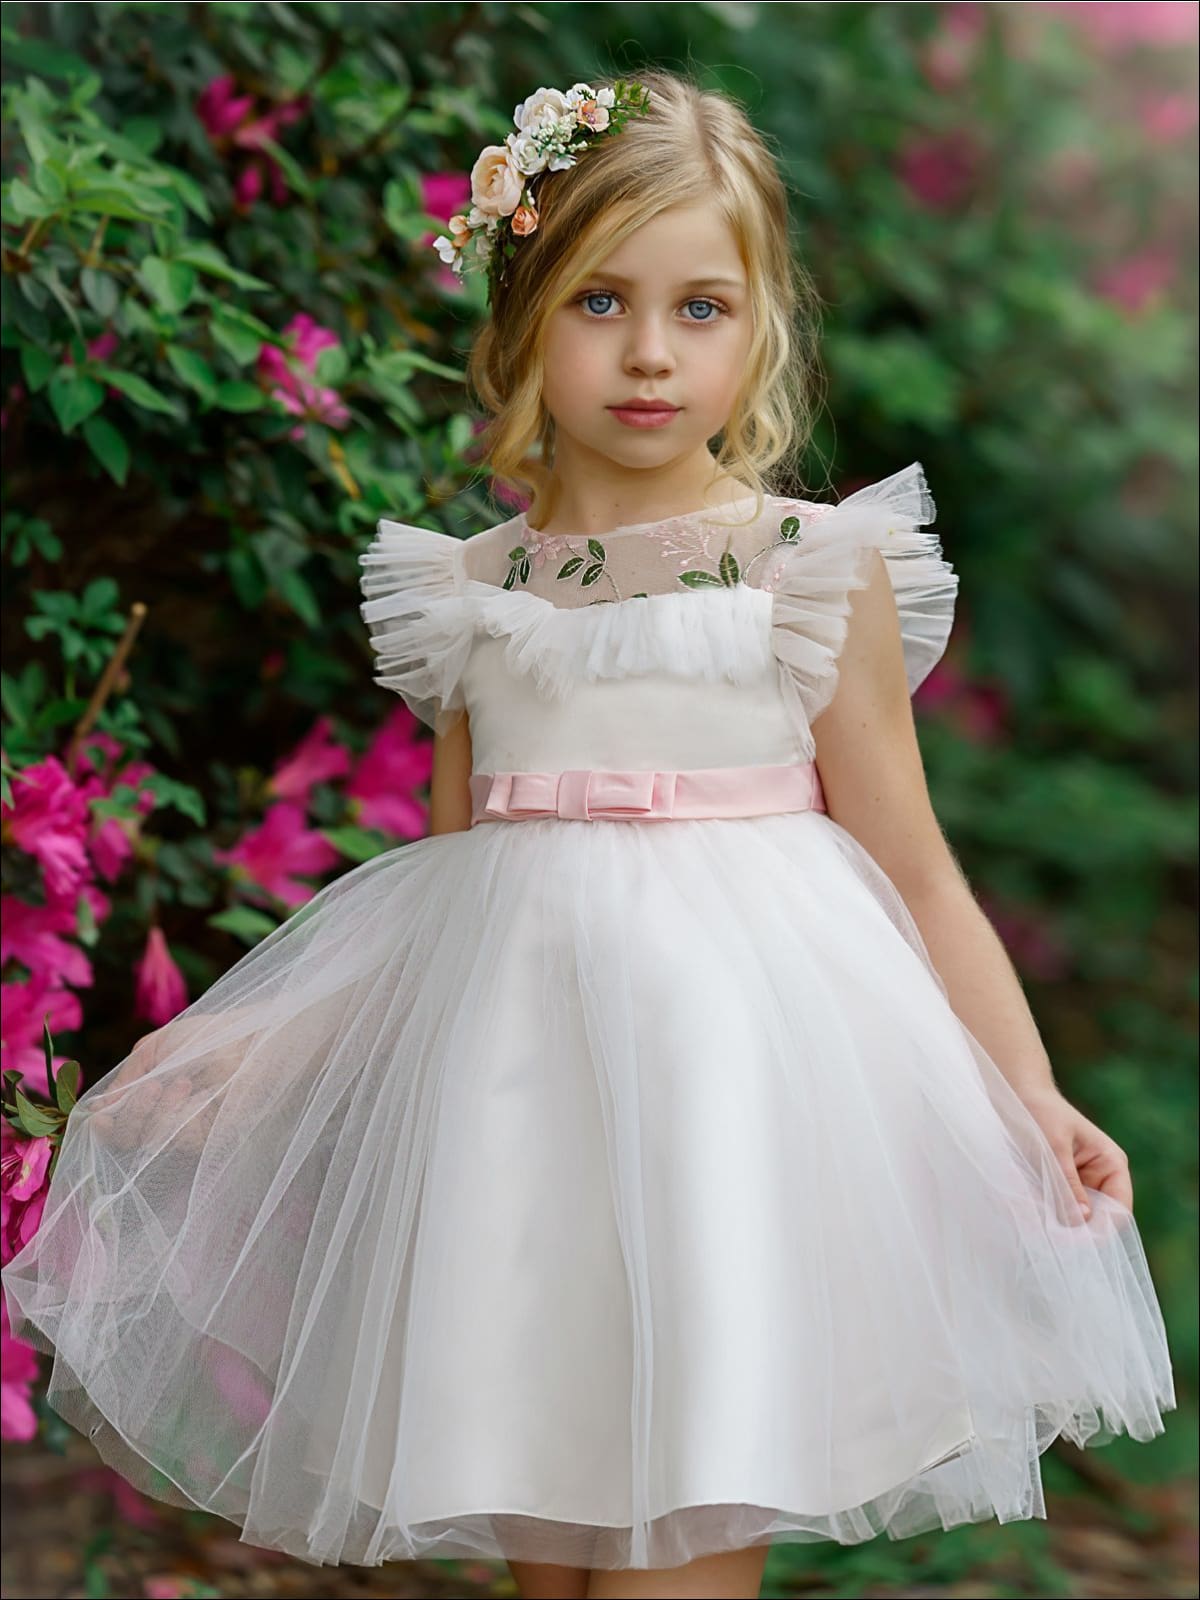 Girls Puffy Lace Flower Embroidered Dress - White / 3T/4T - Girls Spring Dressy Dress